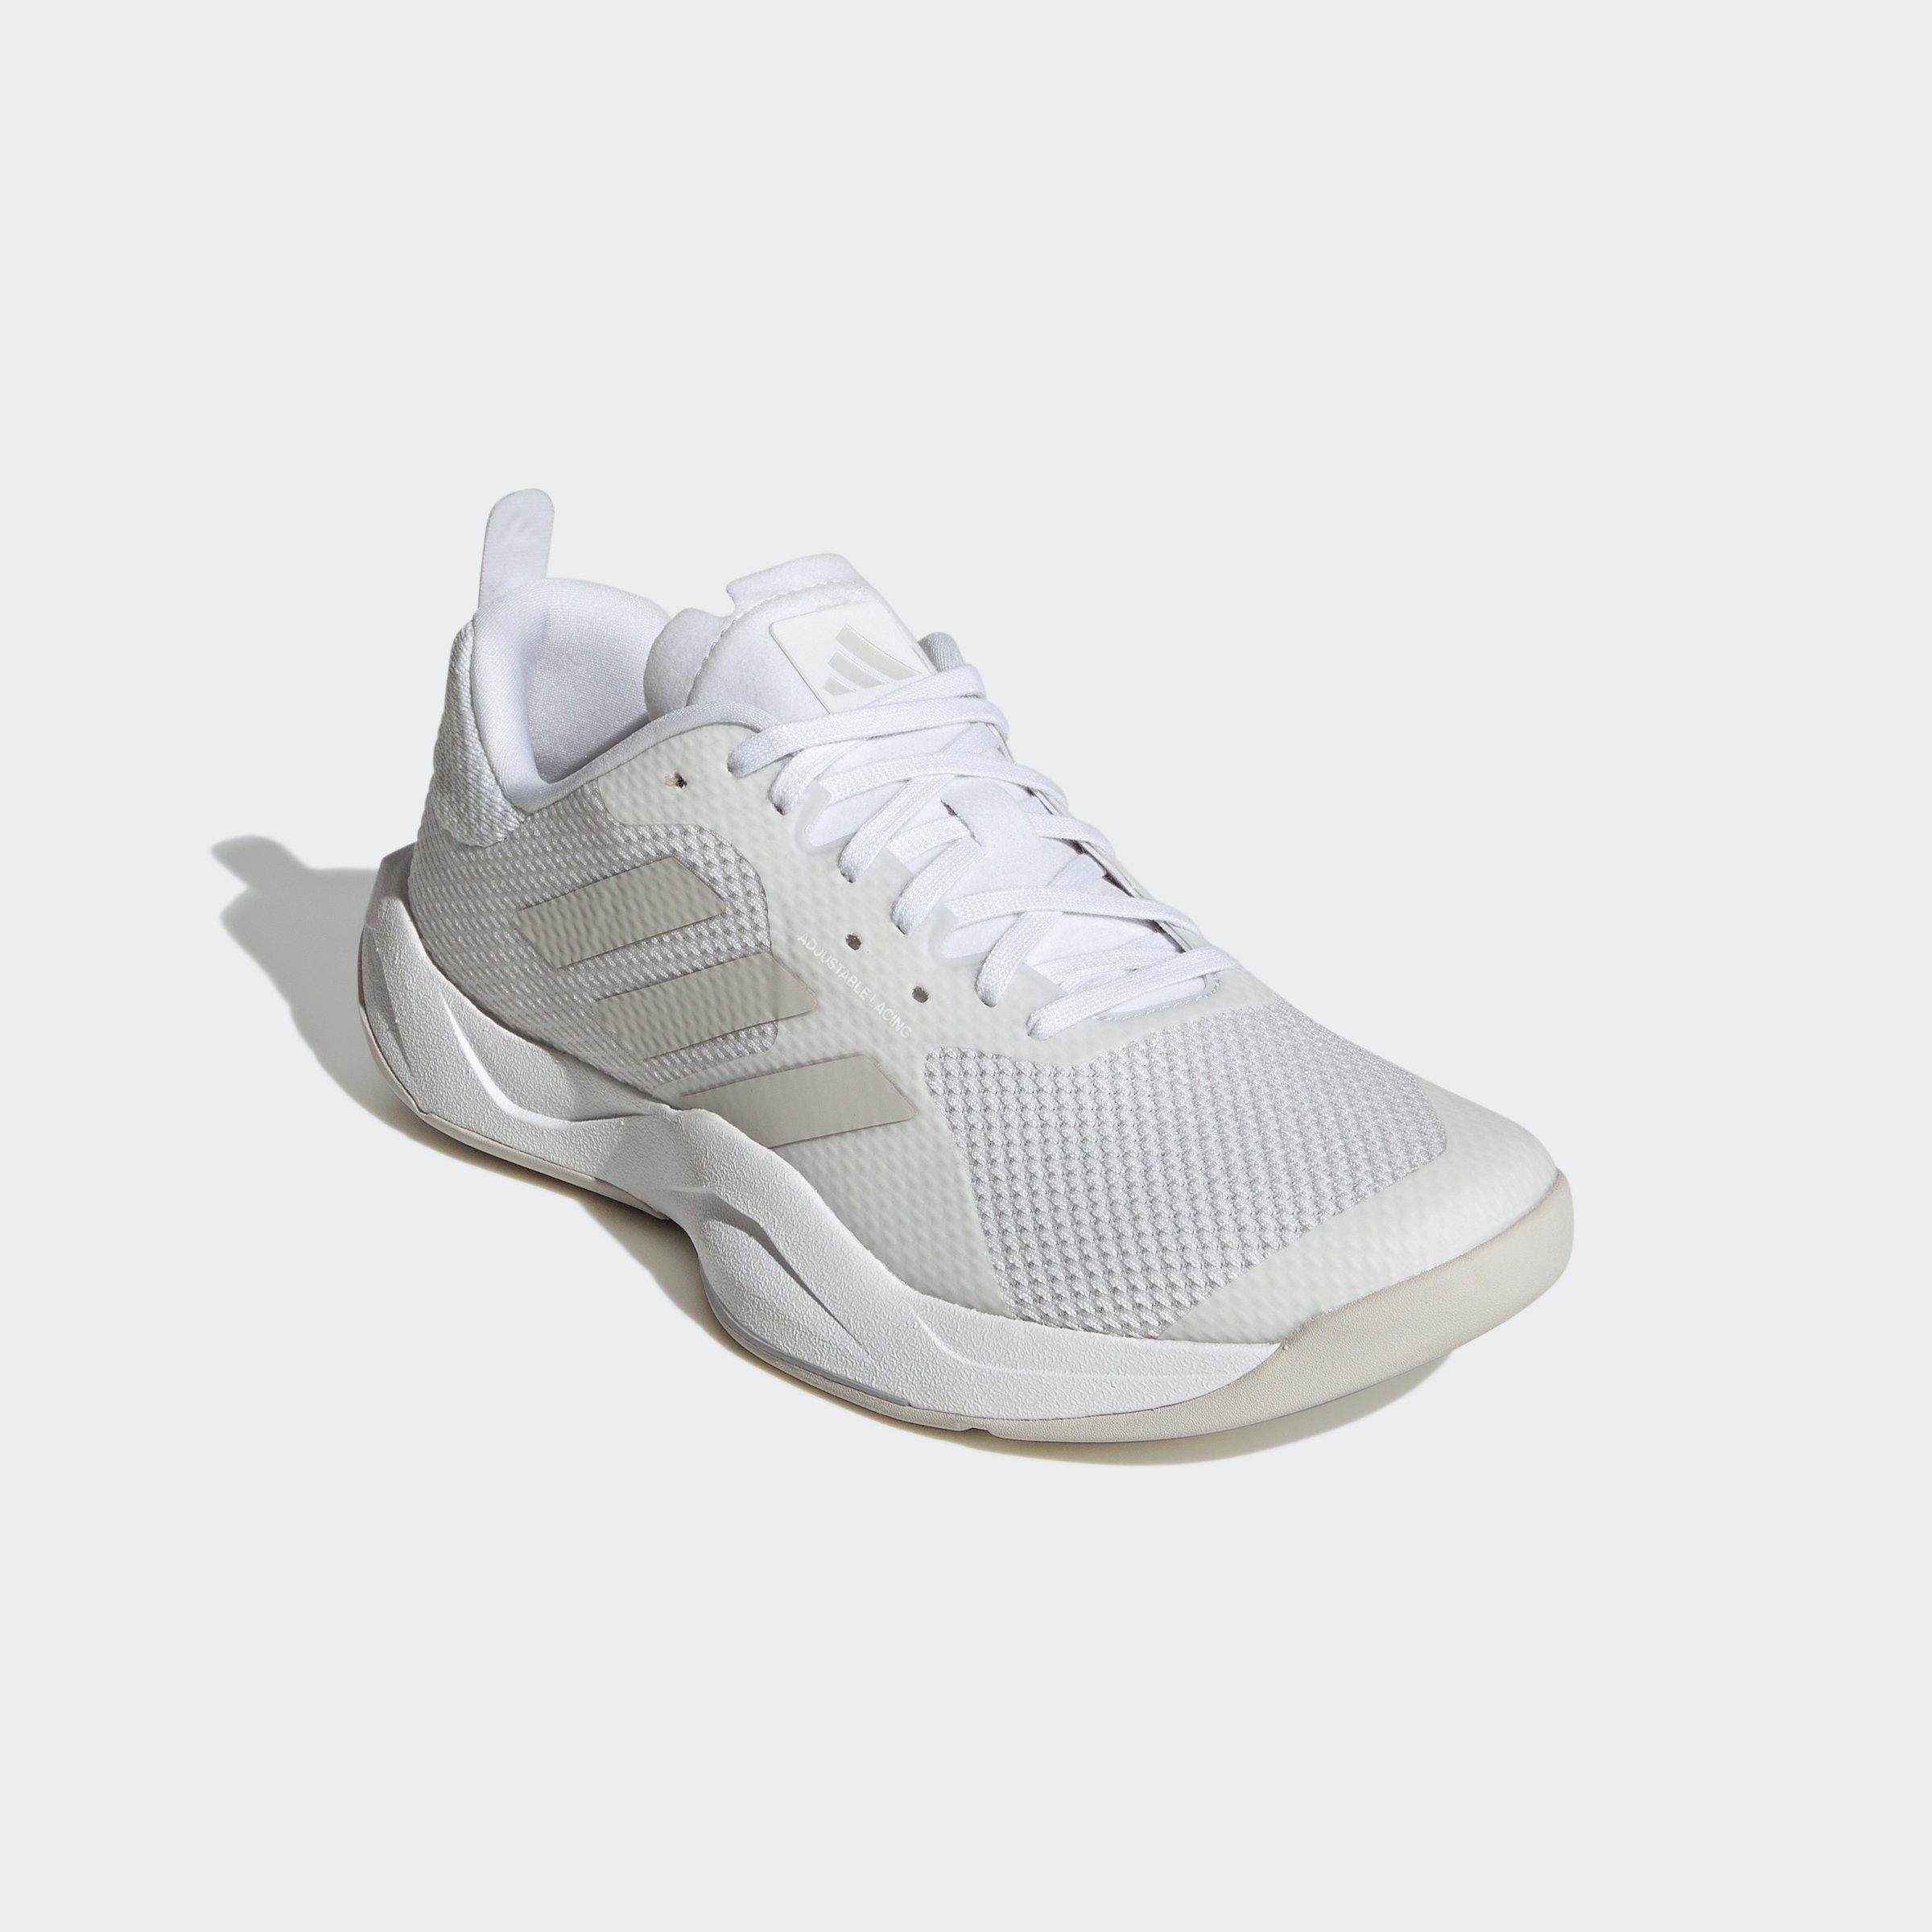 Two Performance / Fitnessschuh Cloud One TRAININGSSCHUH Grey White RAPIDMOVE adidas / Grey